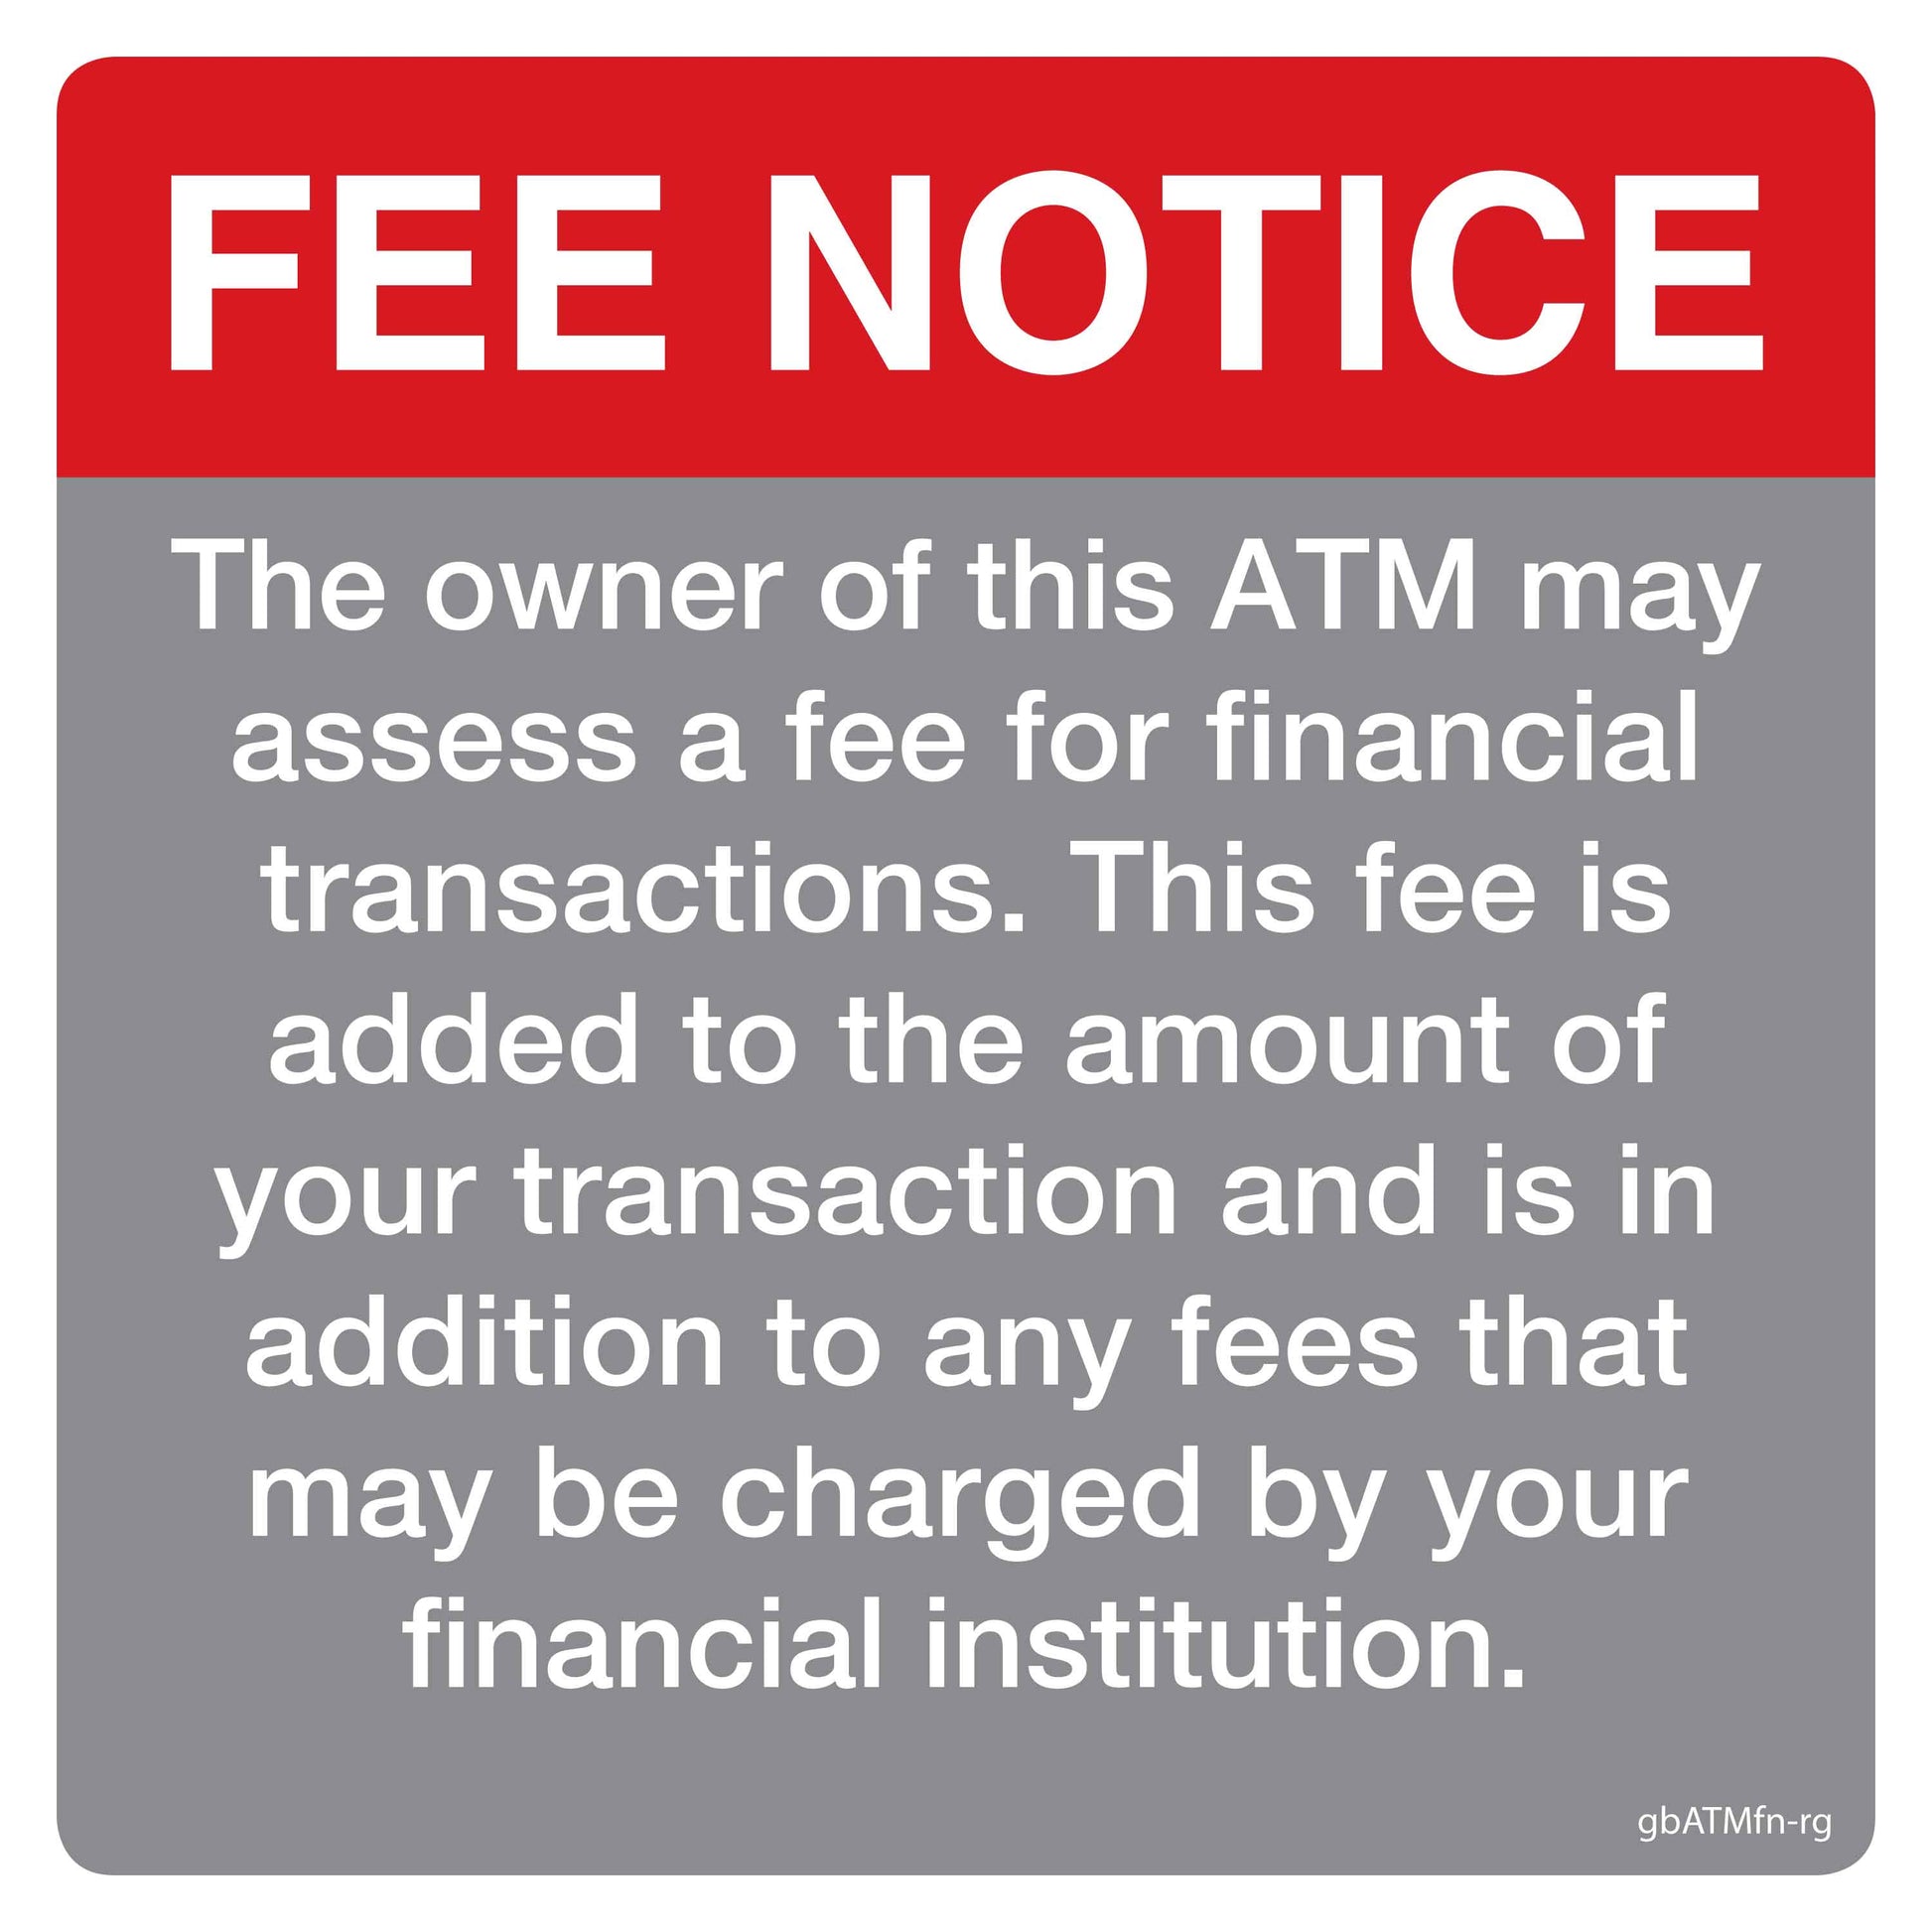 Fee Notice Decal, Red and Gray - 4 inches by 4 inches in size. 